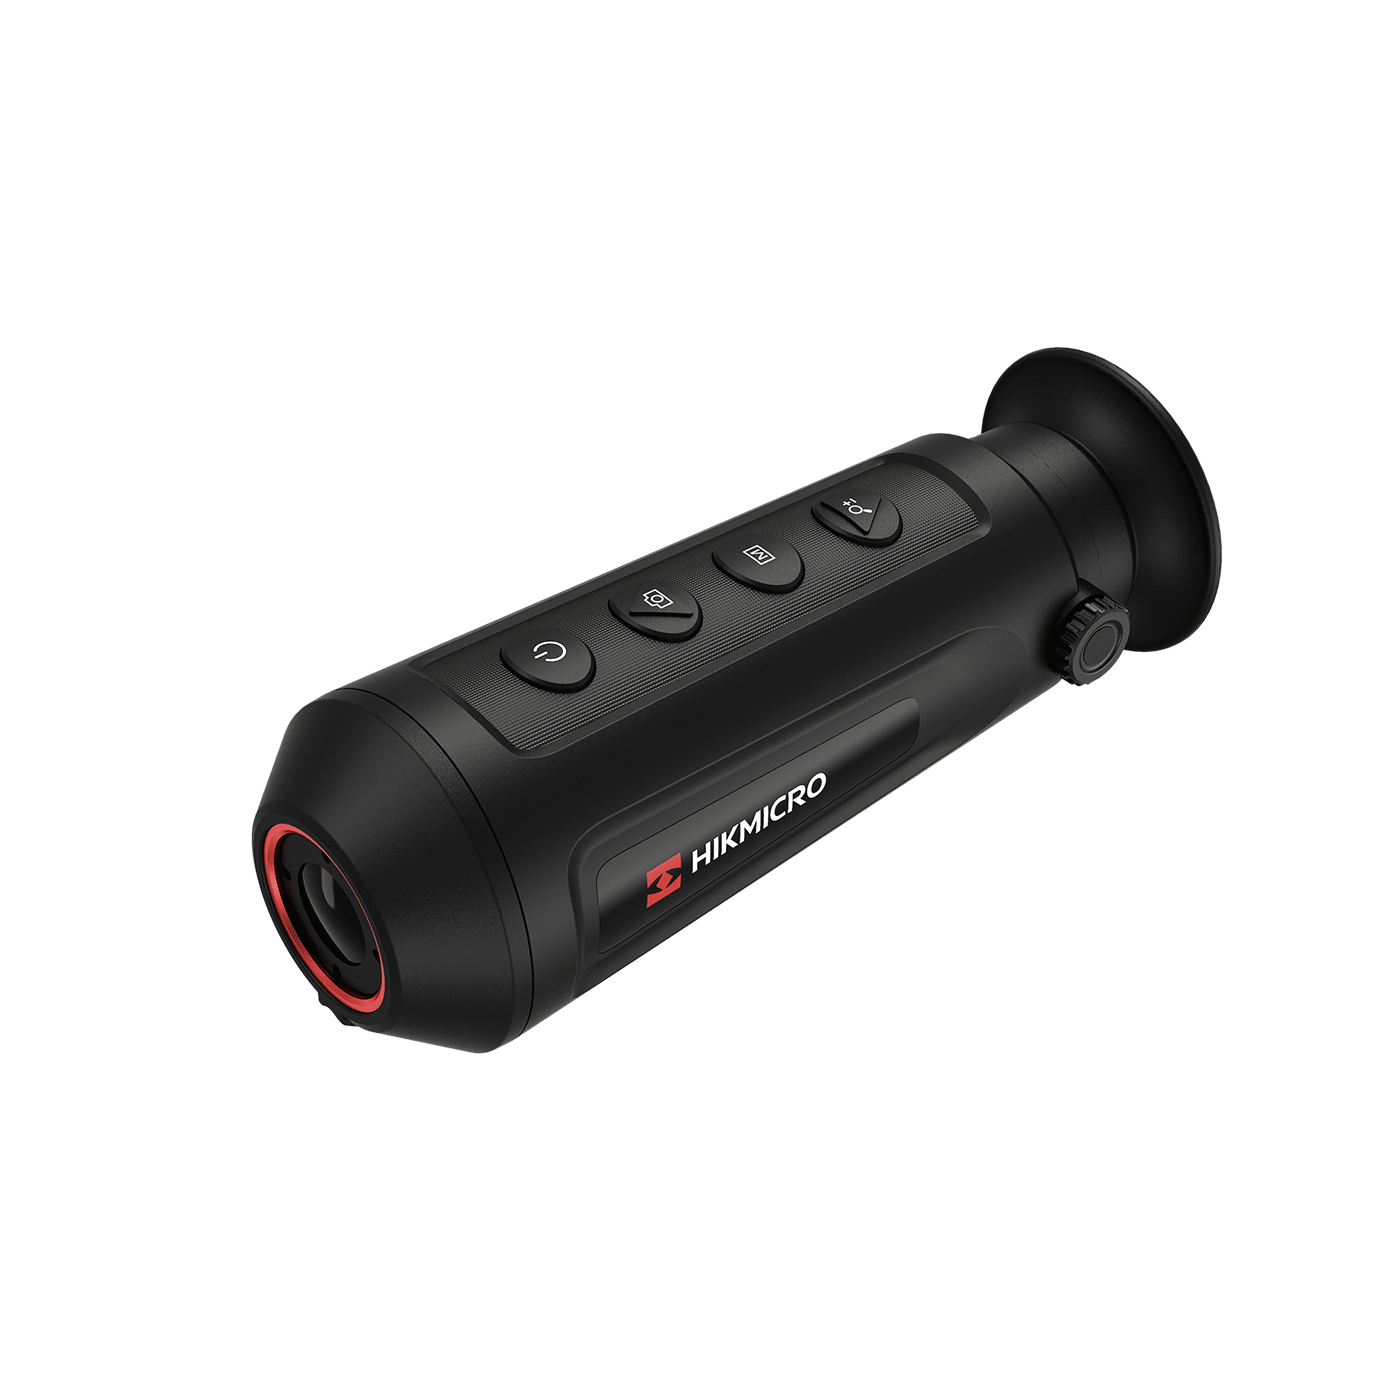 THERMAL MONOCULAR - HIKMICRO - LYNX S PRO LE15S